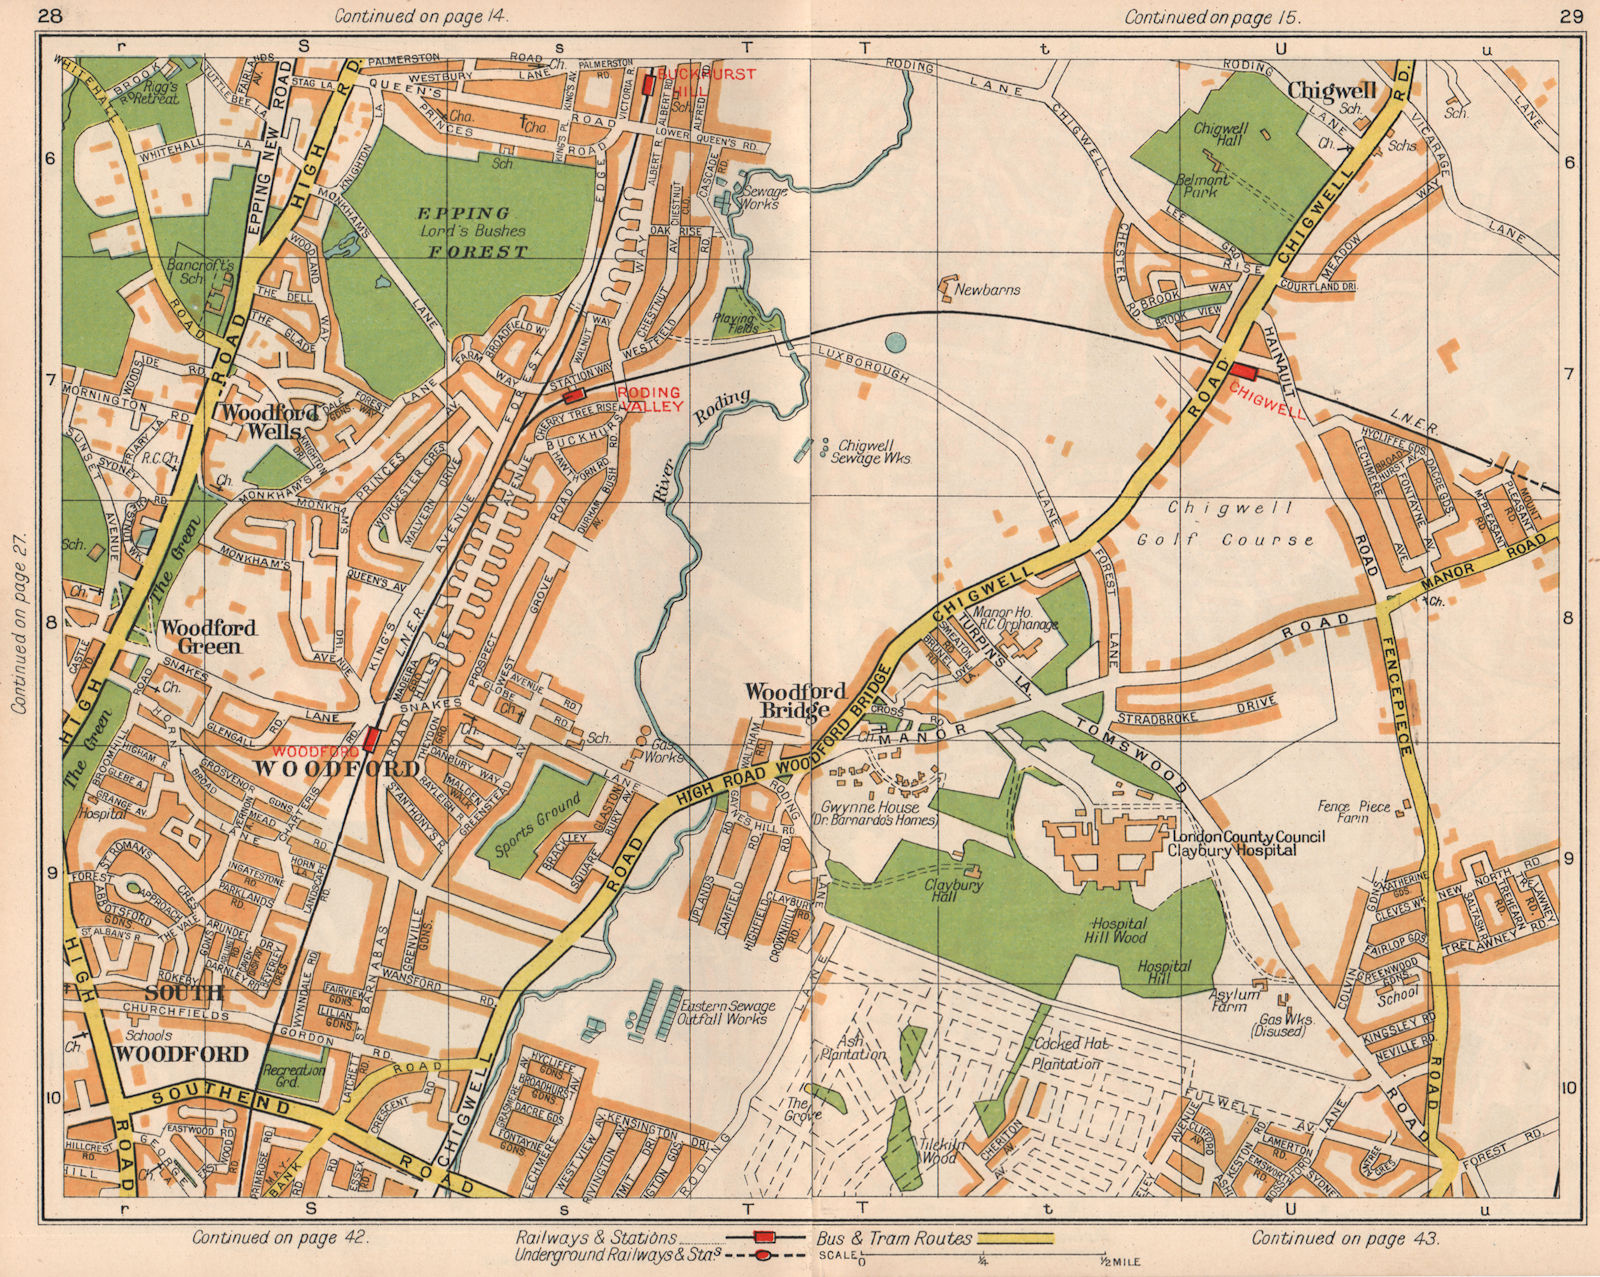 NE LONDON. South Woodford Green Chigwell Grange Hill Roding Valley 1938 map